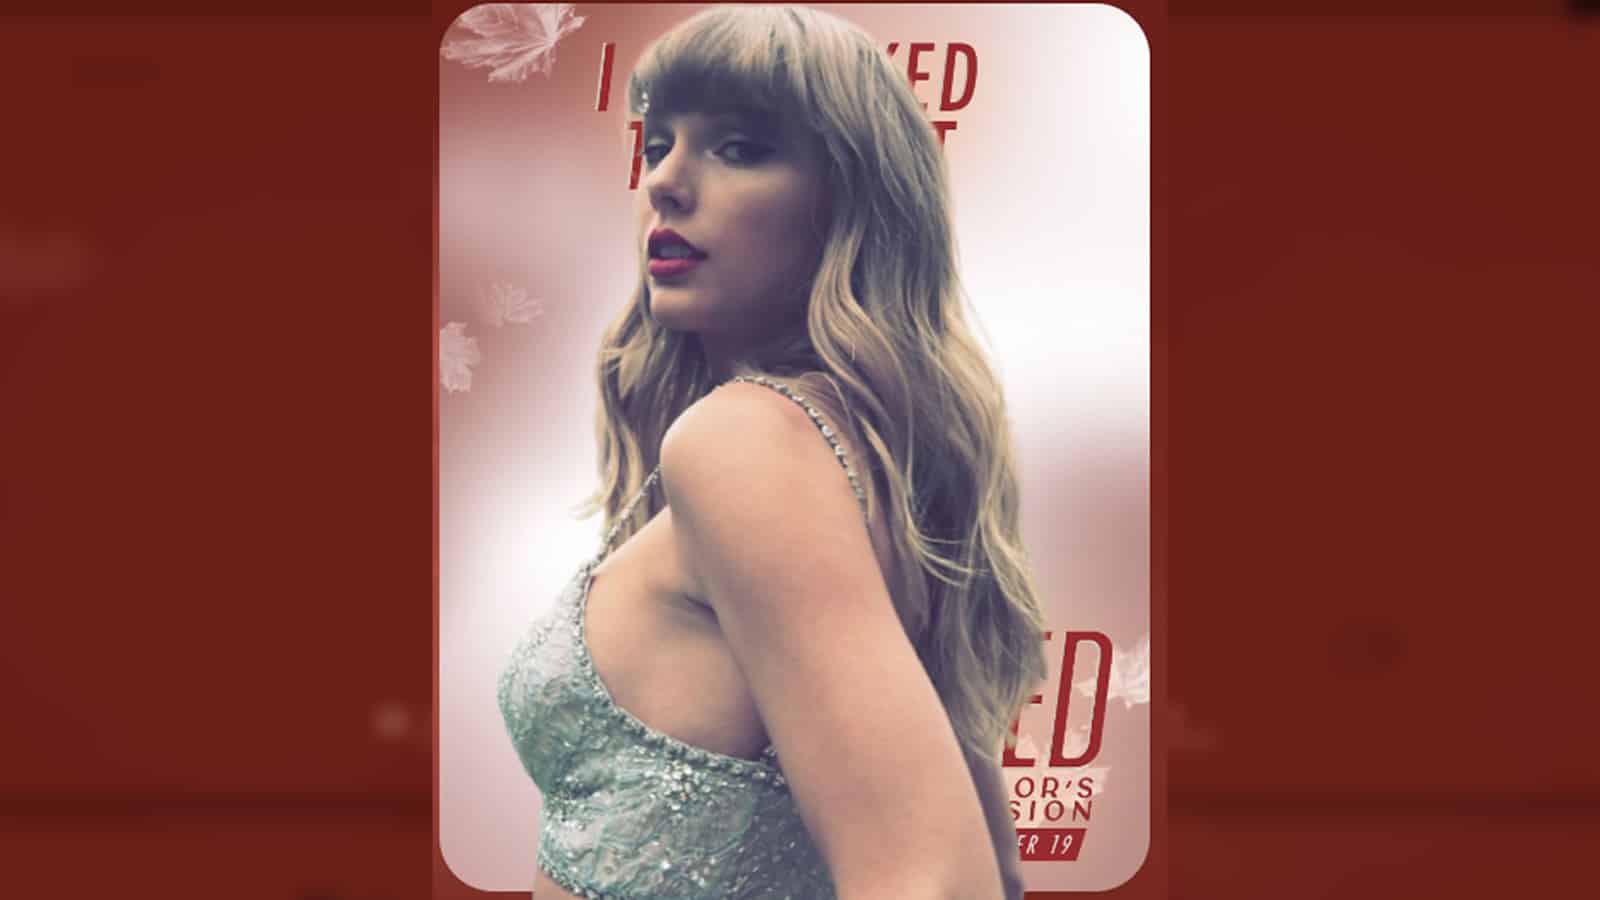 Taylor-Swift-fans-are-decoding-her-mysterious-Vault-video-ahead-of-'Red'-re-release